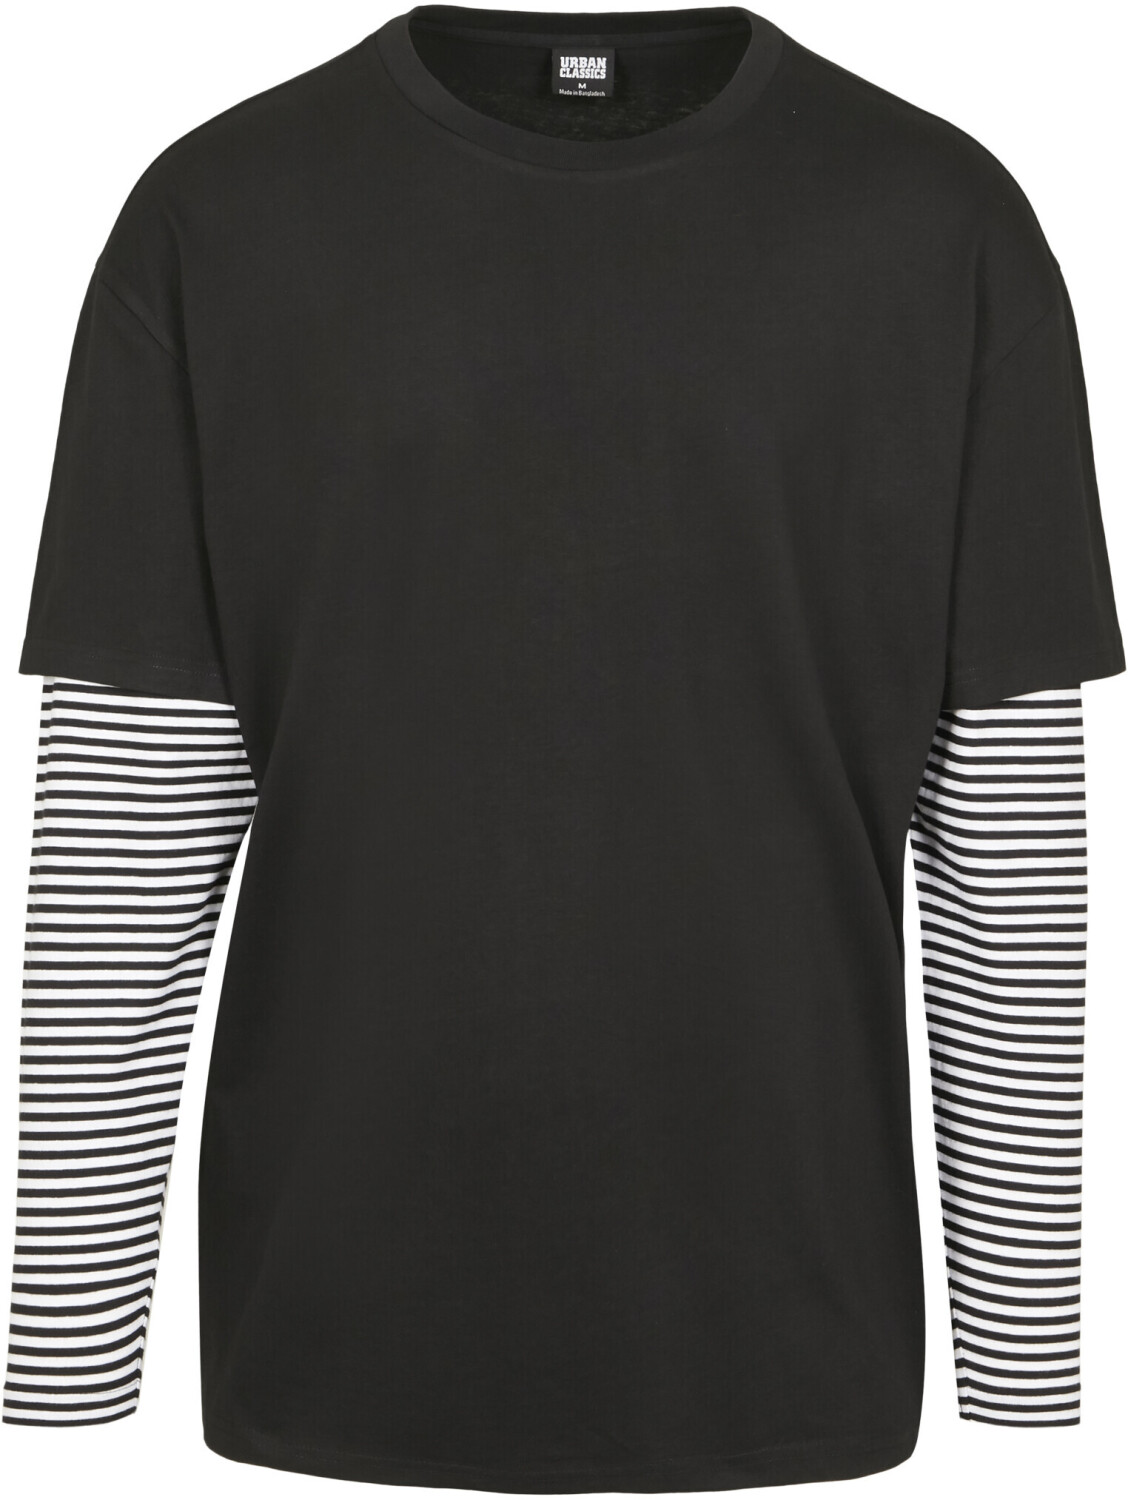 Tee (TB3498) Double Striped – Deals from LS on Buy Classics black Urban Best £11.99 Oversized (Today) Layer